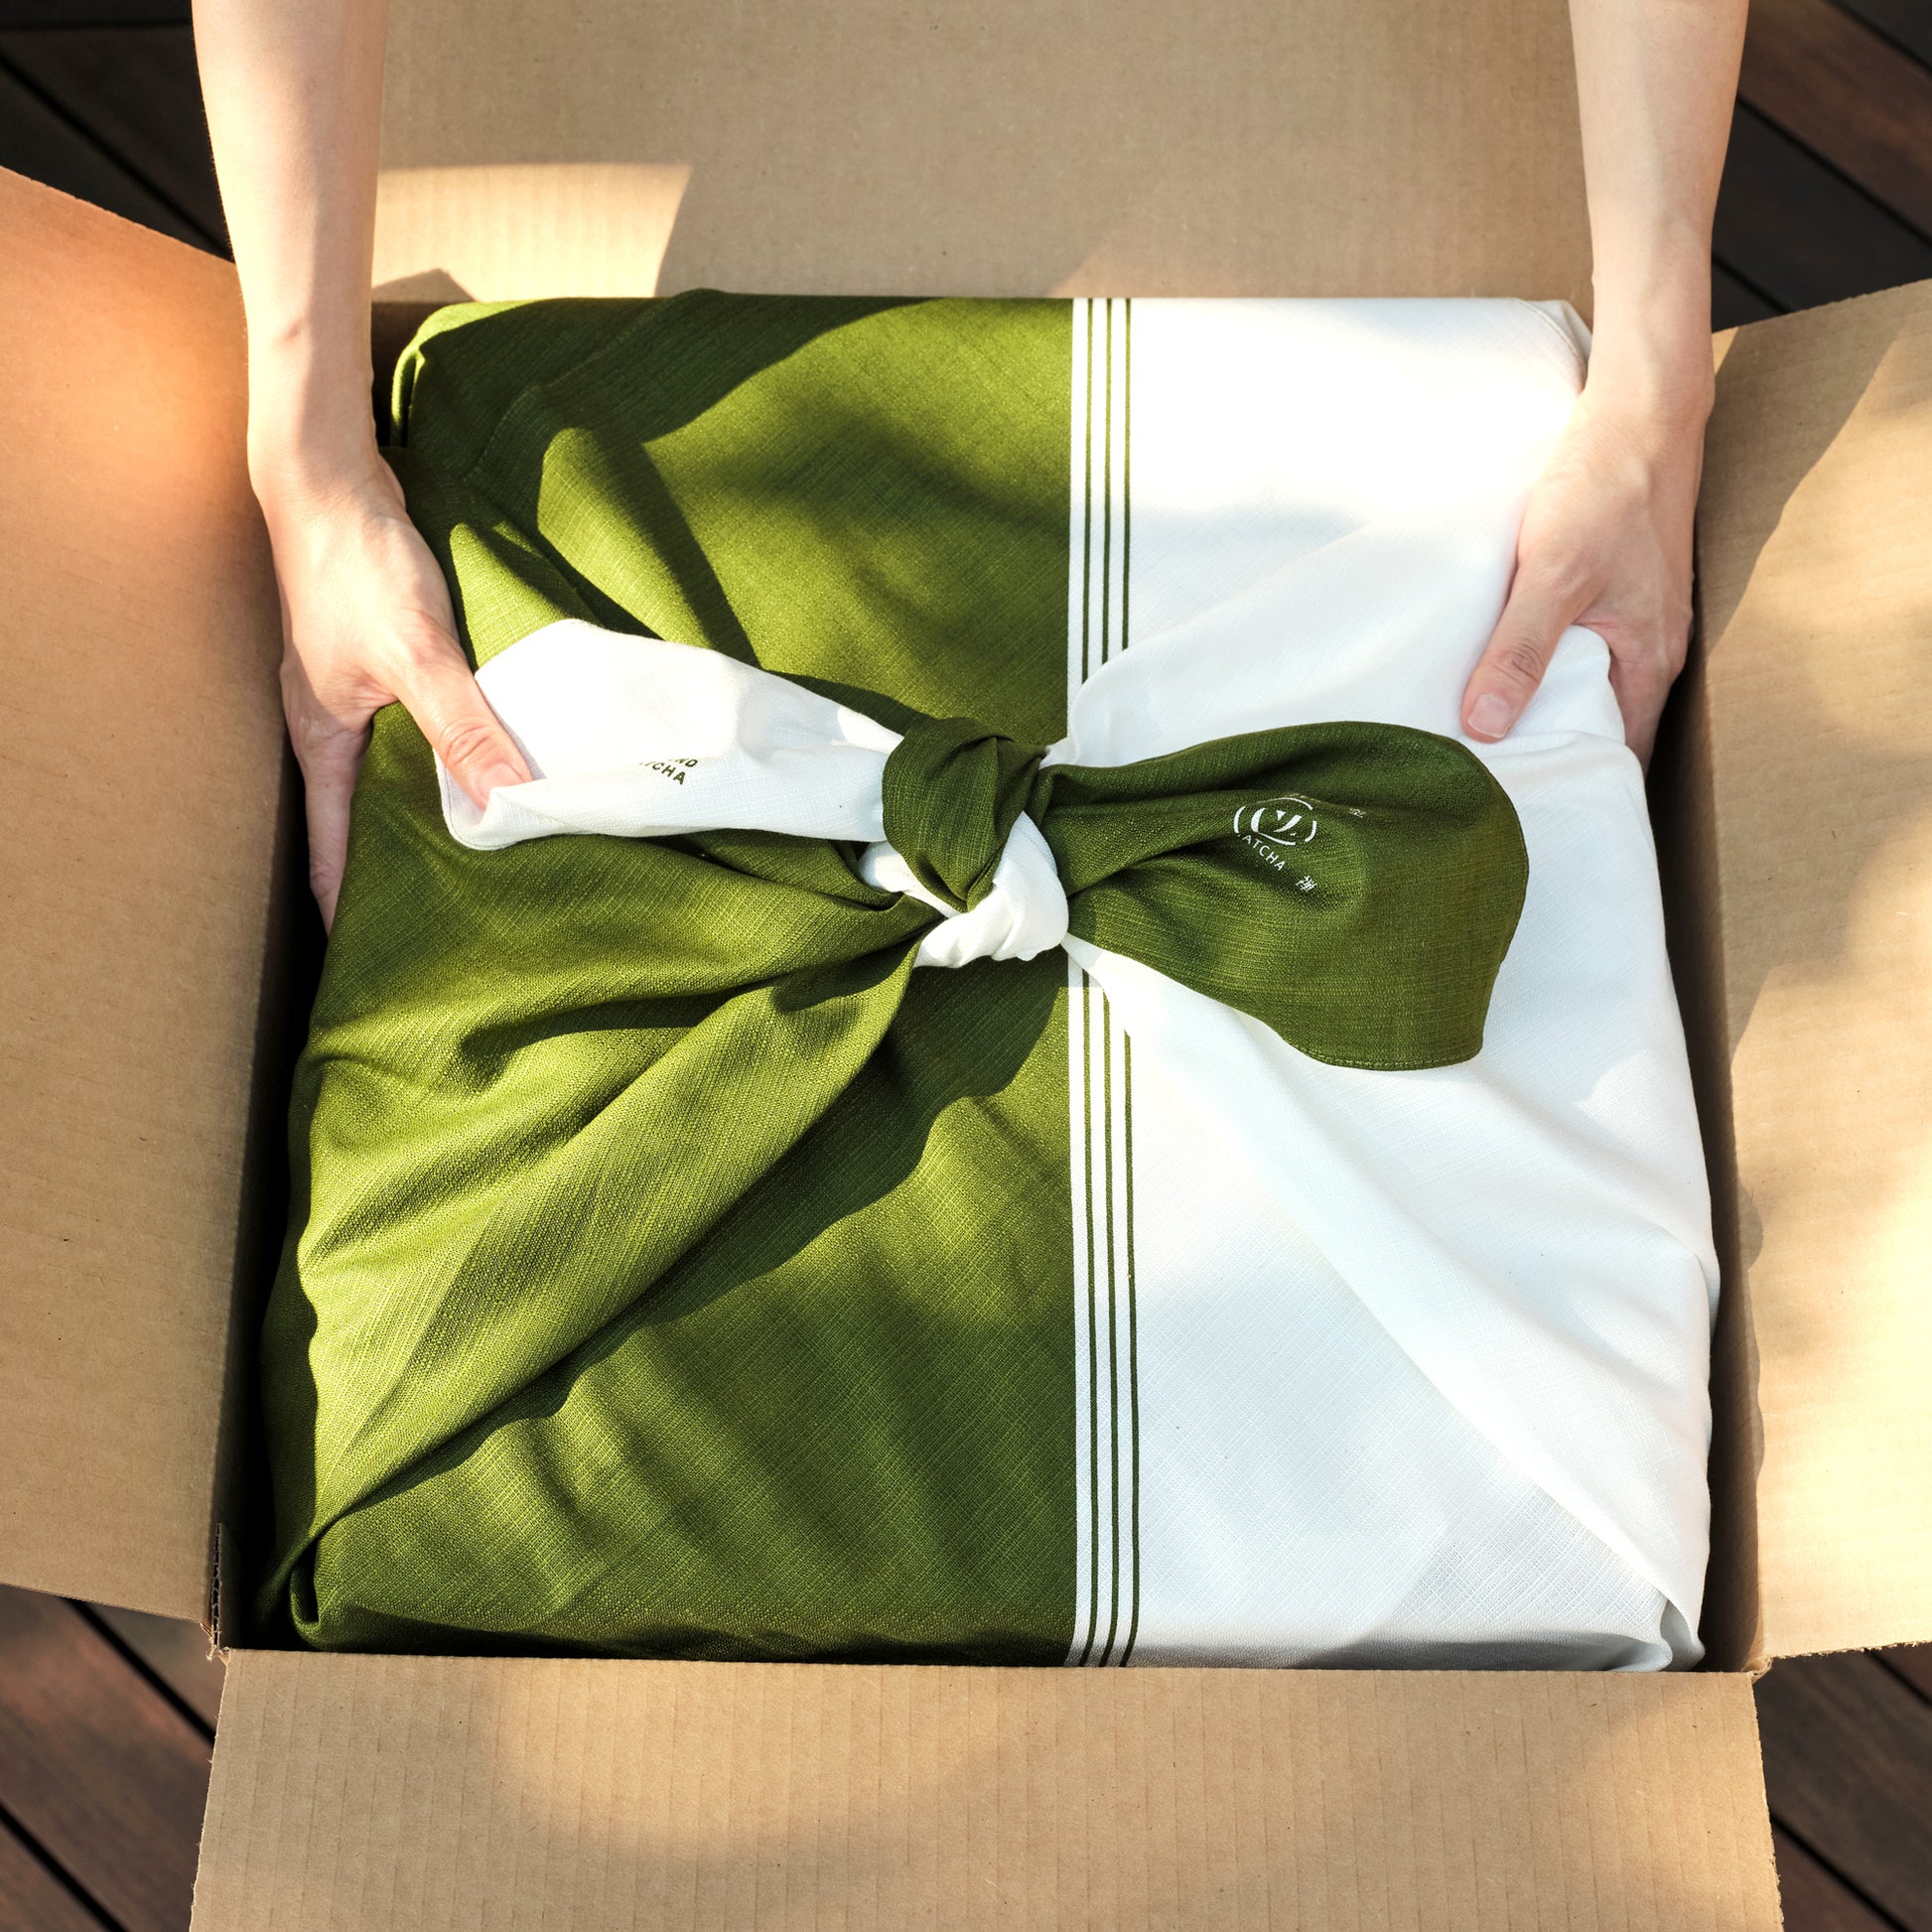 Matcha Combo Gift Kit,A REAL GOOD DEAL Our gift kit includes 1 bag